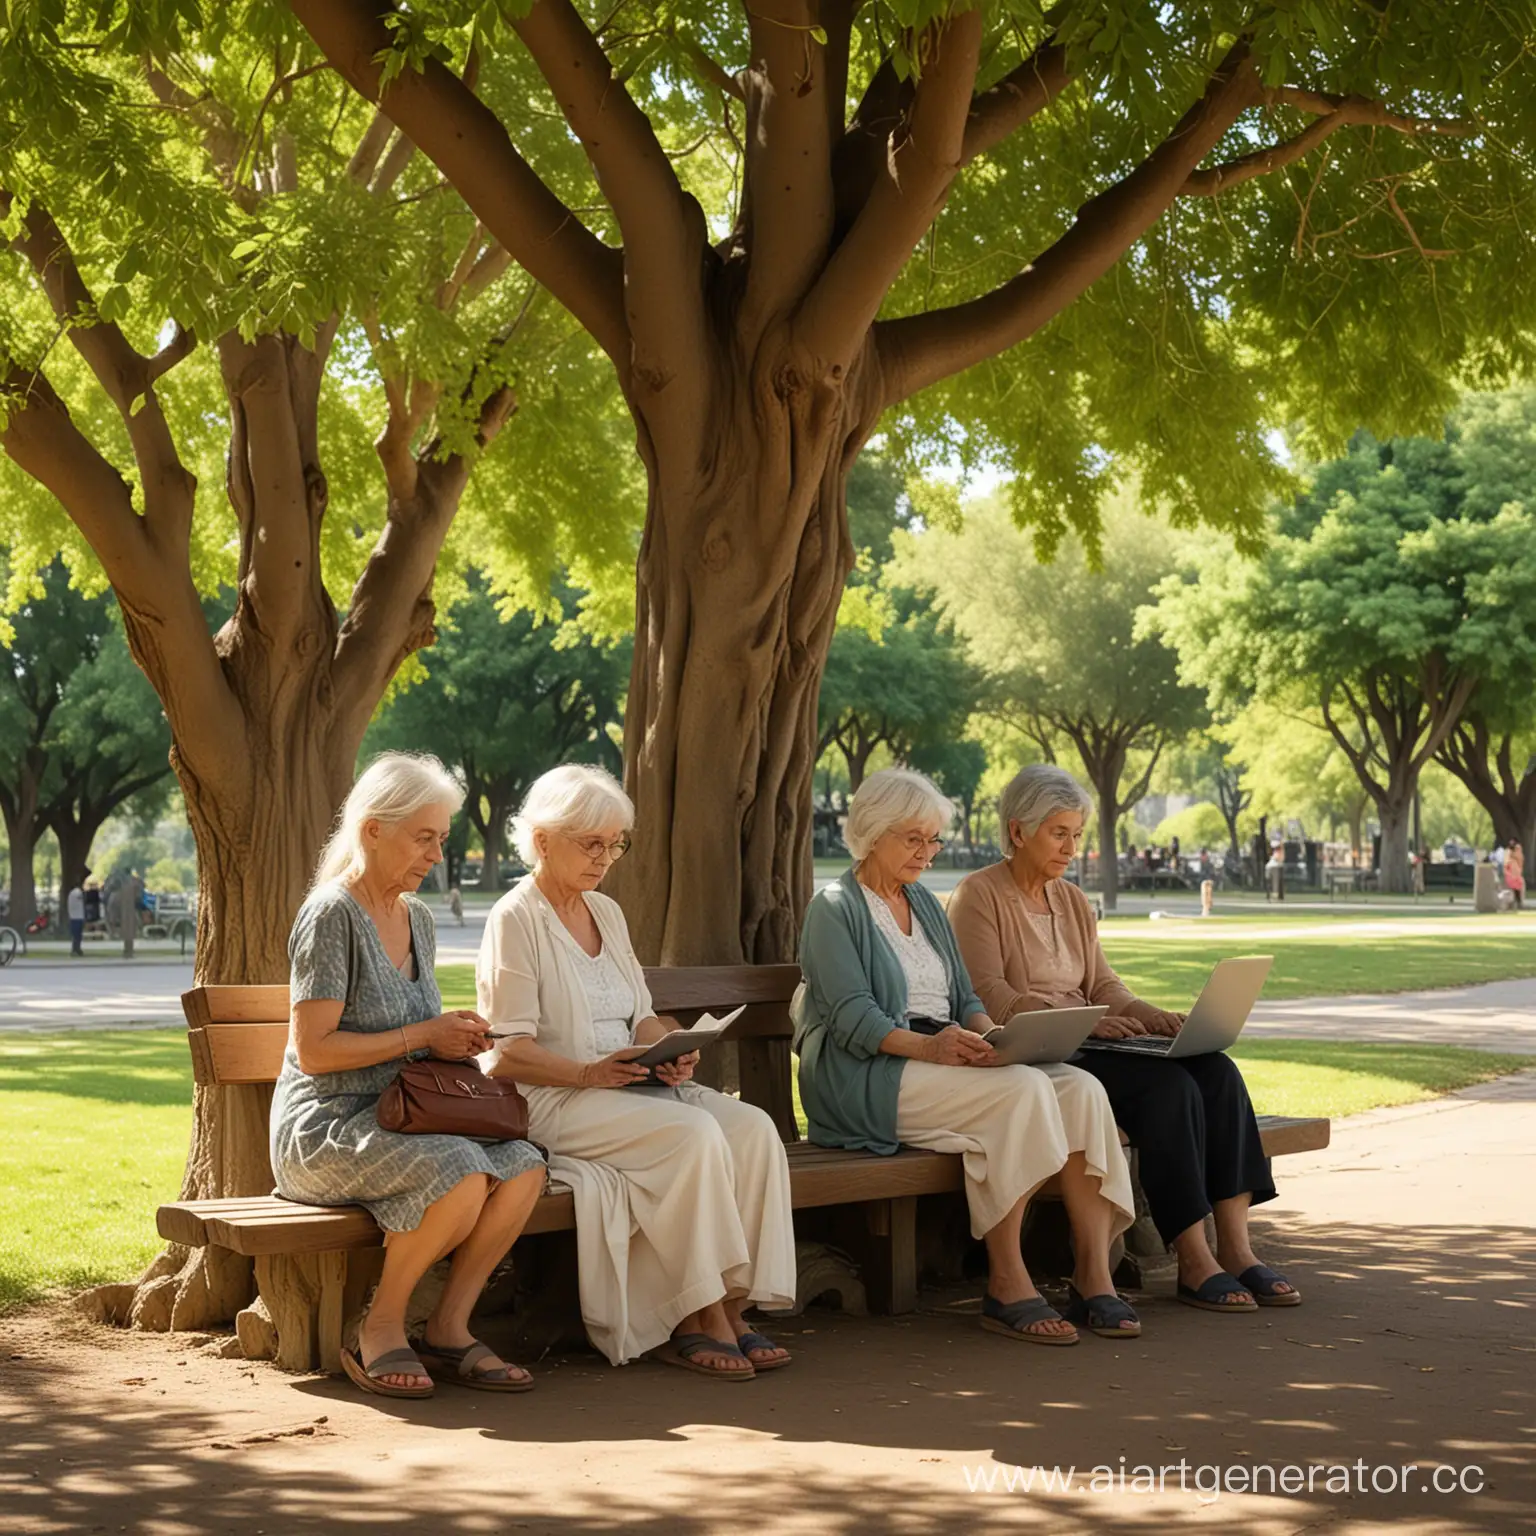 The scene depicts a peaceful park setting with a wooden bench situated beneath the shade of a sprawling tree. Four elderly ladies are seated on the bench, positioned closely together.

In the center of the bench, an elderly woman with silver hair is seated, her back slightly hunched as she focuses intently on a laptop resting on her thighs.  